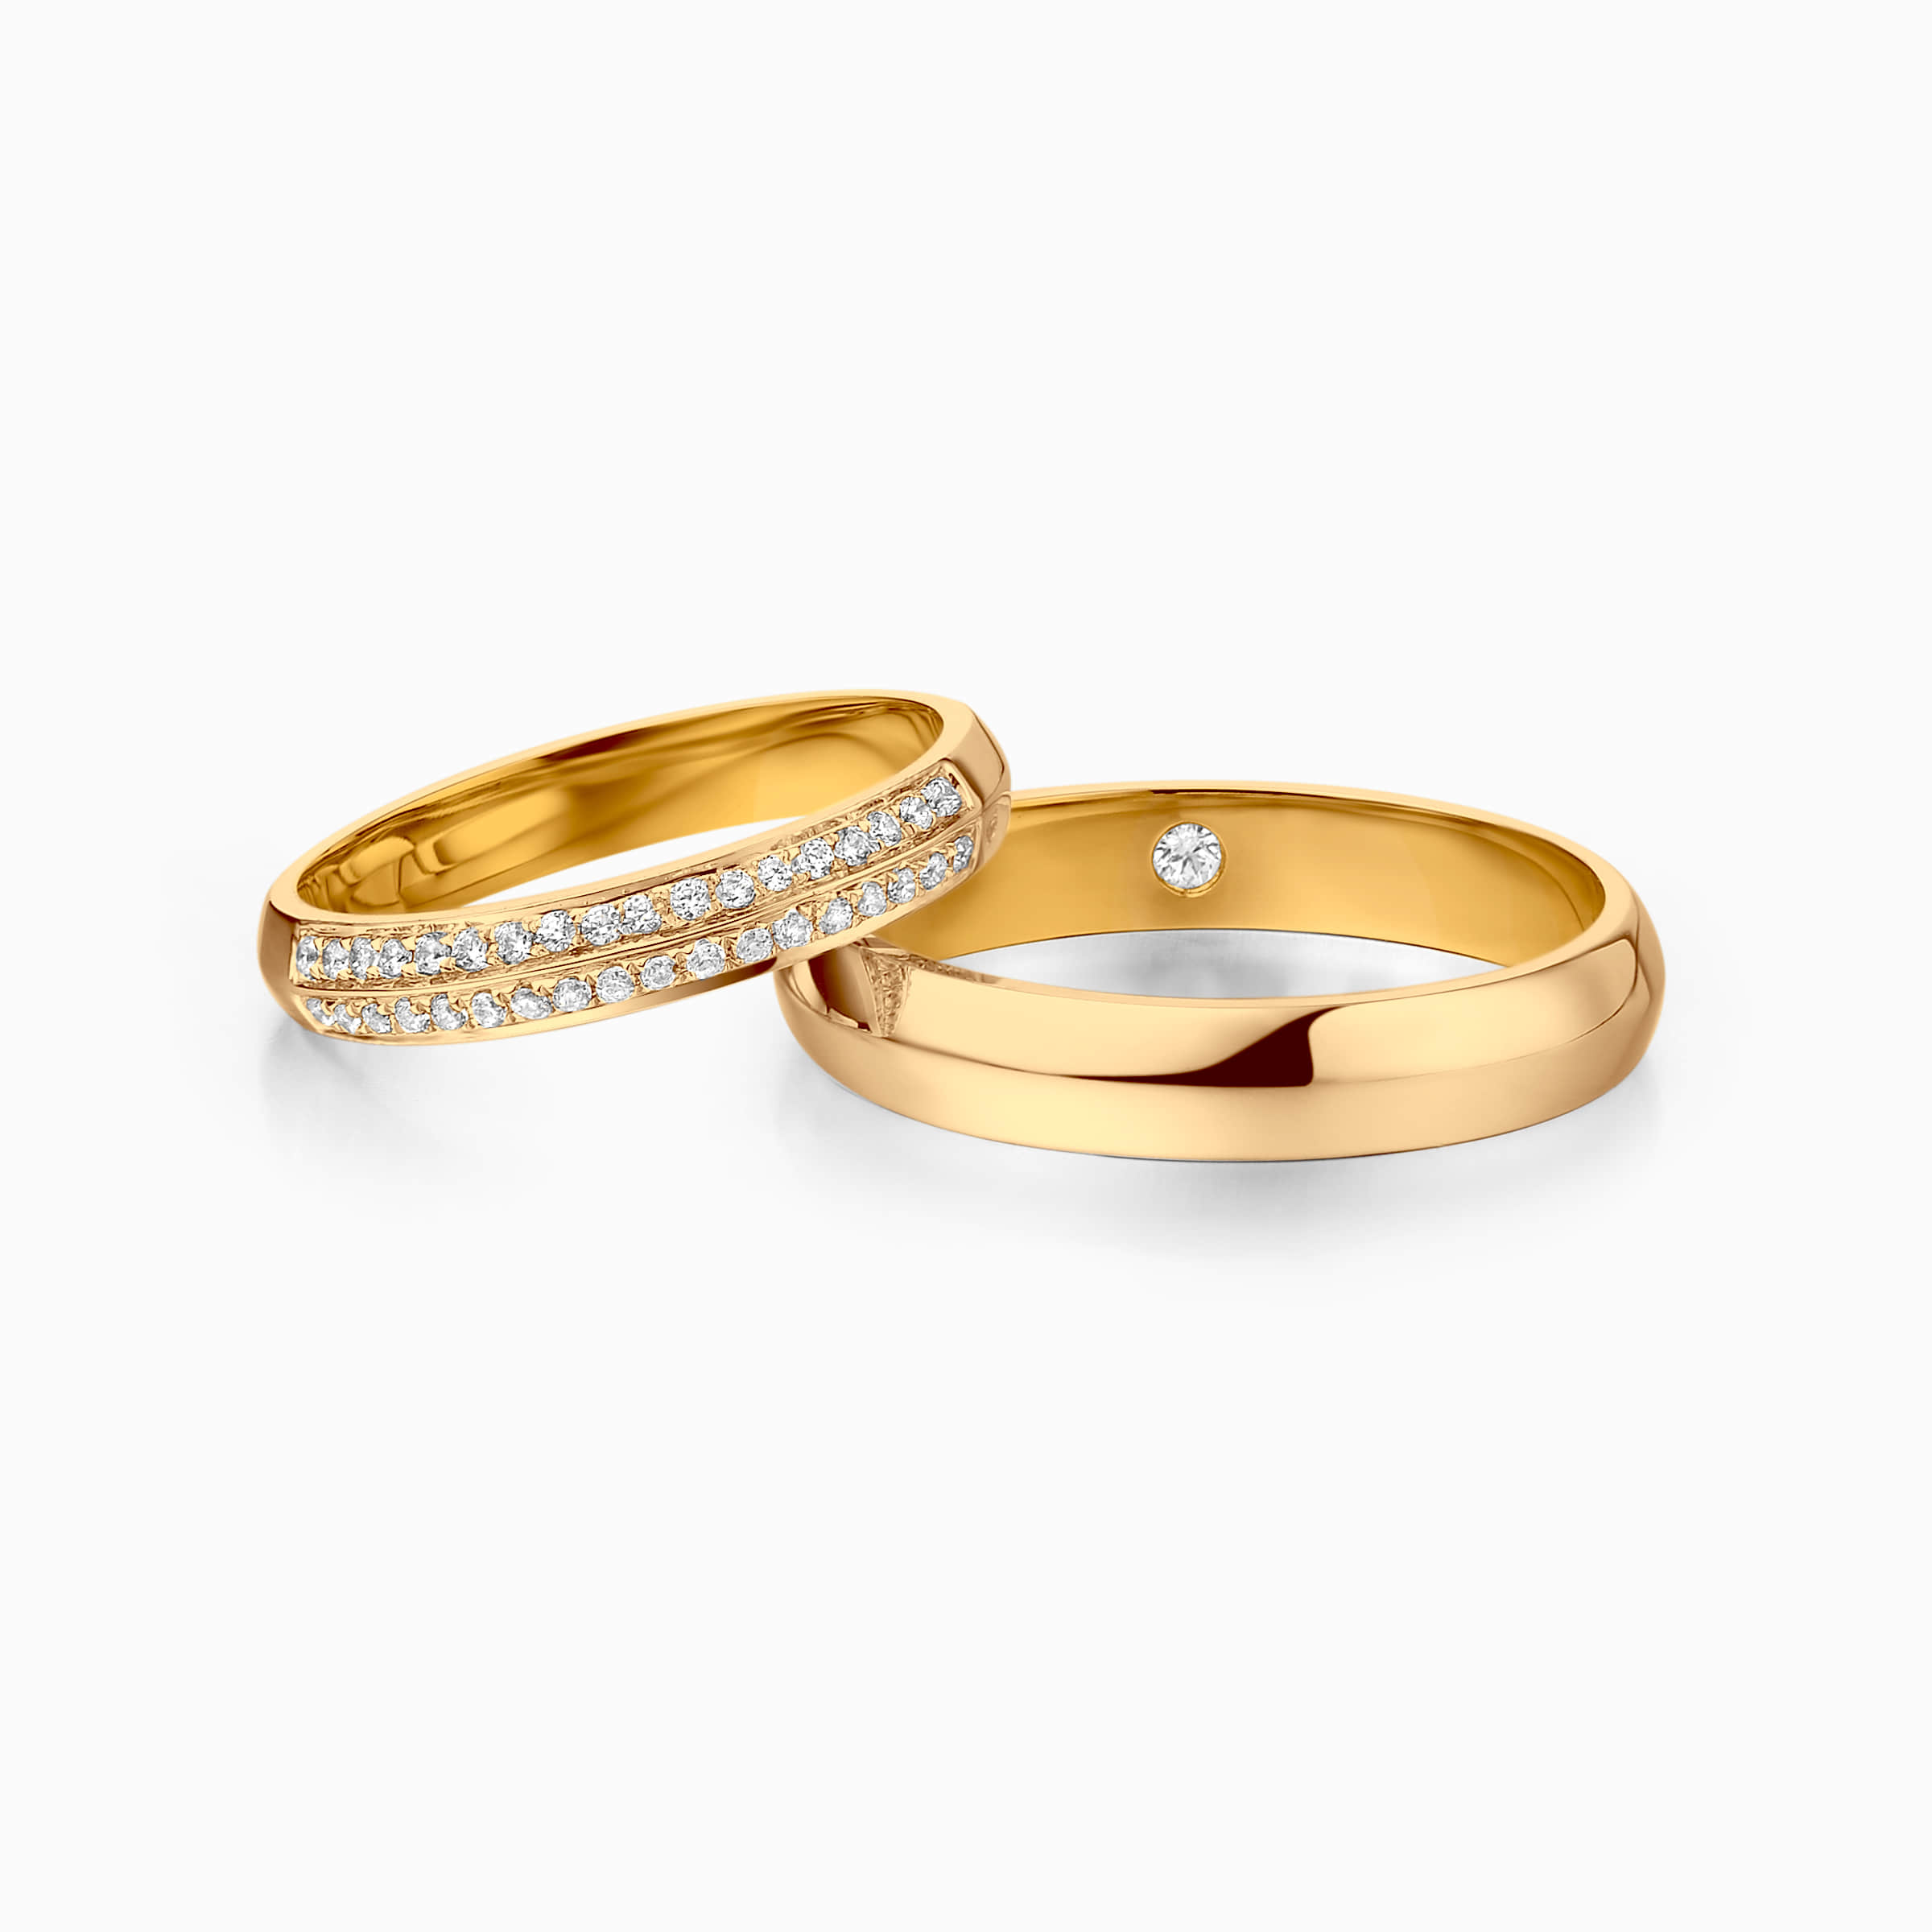 Darry Ring double row wedding bands in yellow gold